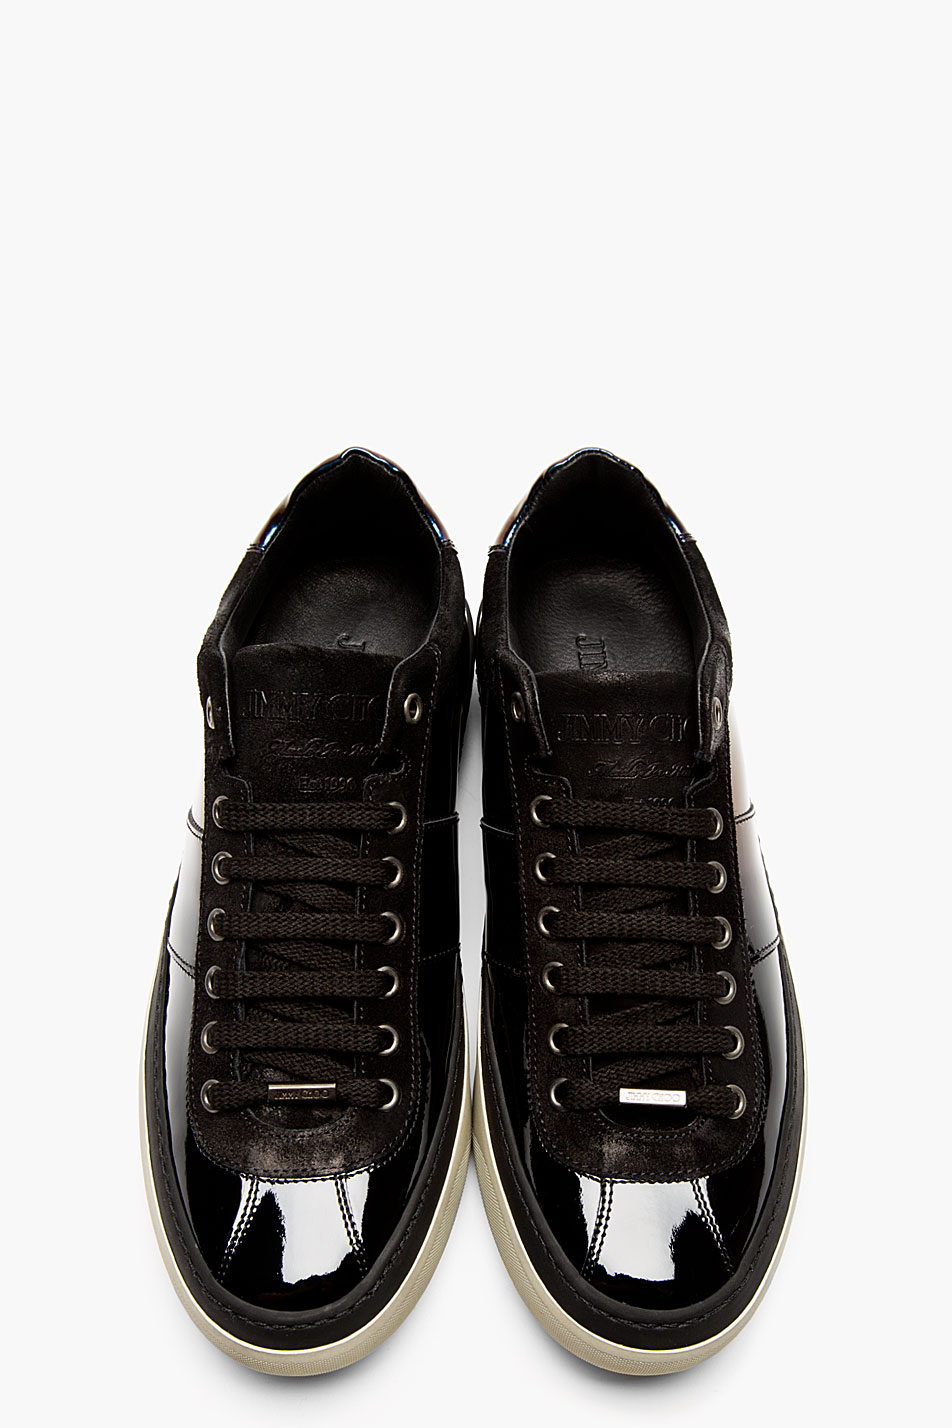 Jimmy Choo Black Iridescent Patent Leather Portman Tennis Sneakers for ...